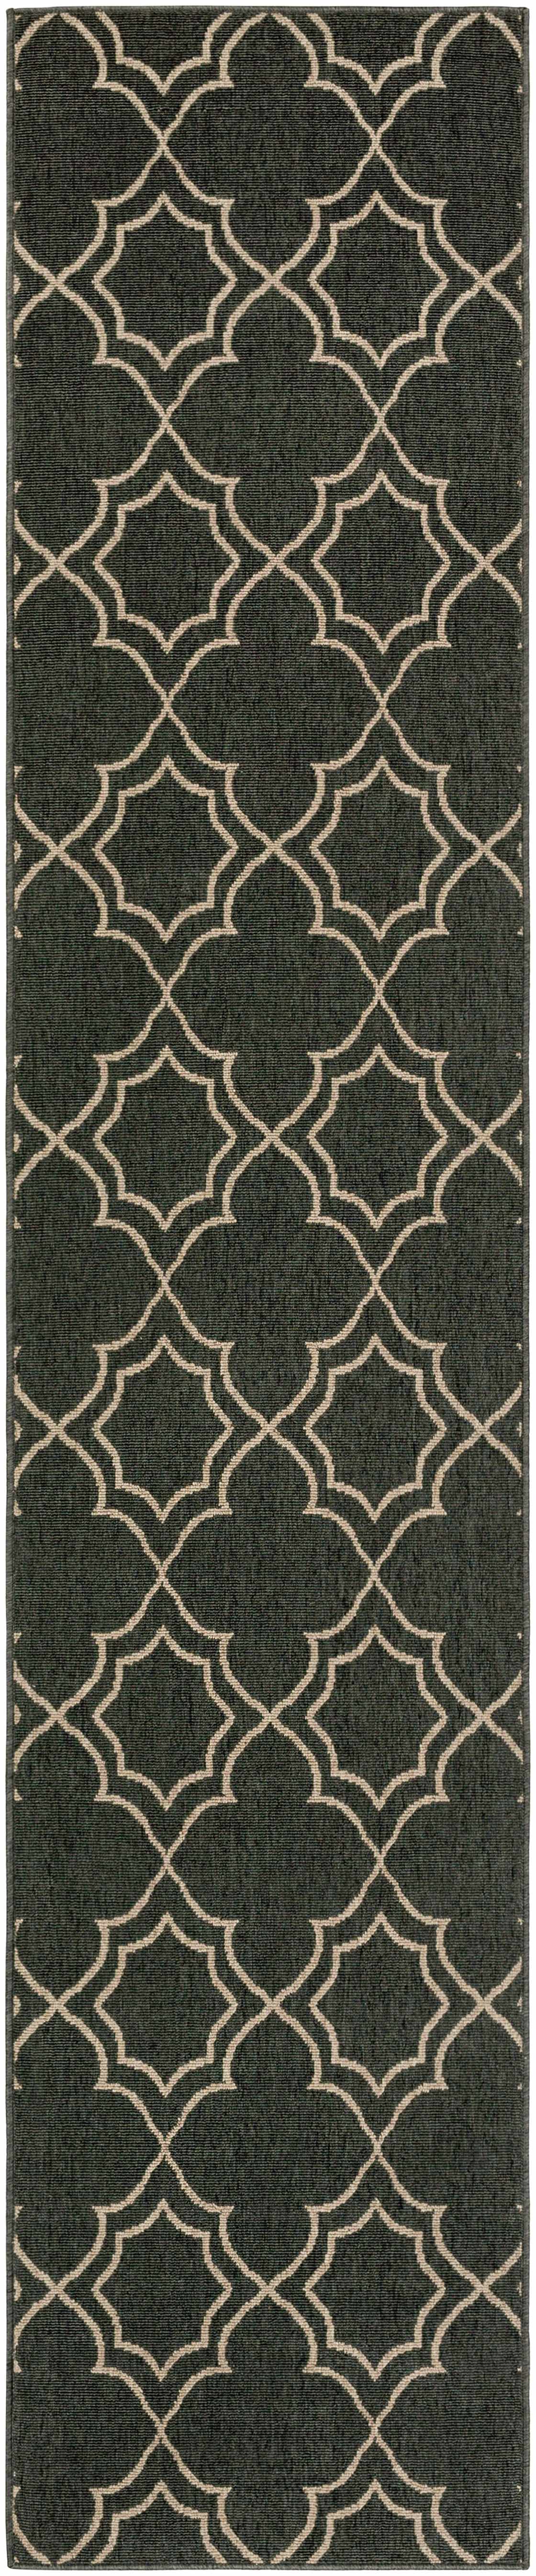 Boutique Rugs Rugs 2'5" x 11'10" Runner Chertsey Area Rug